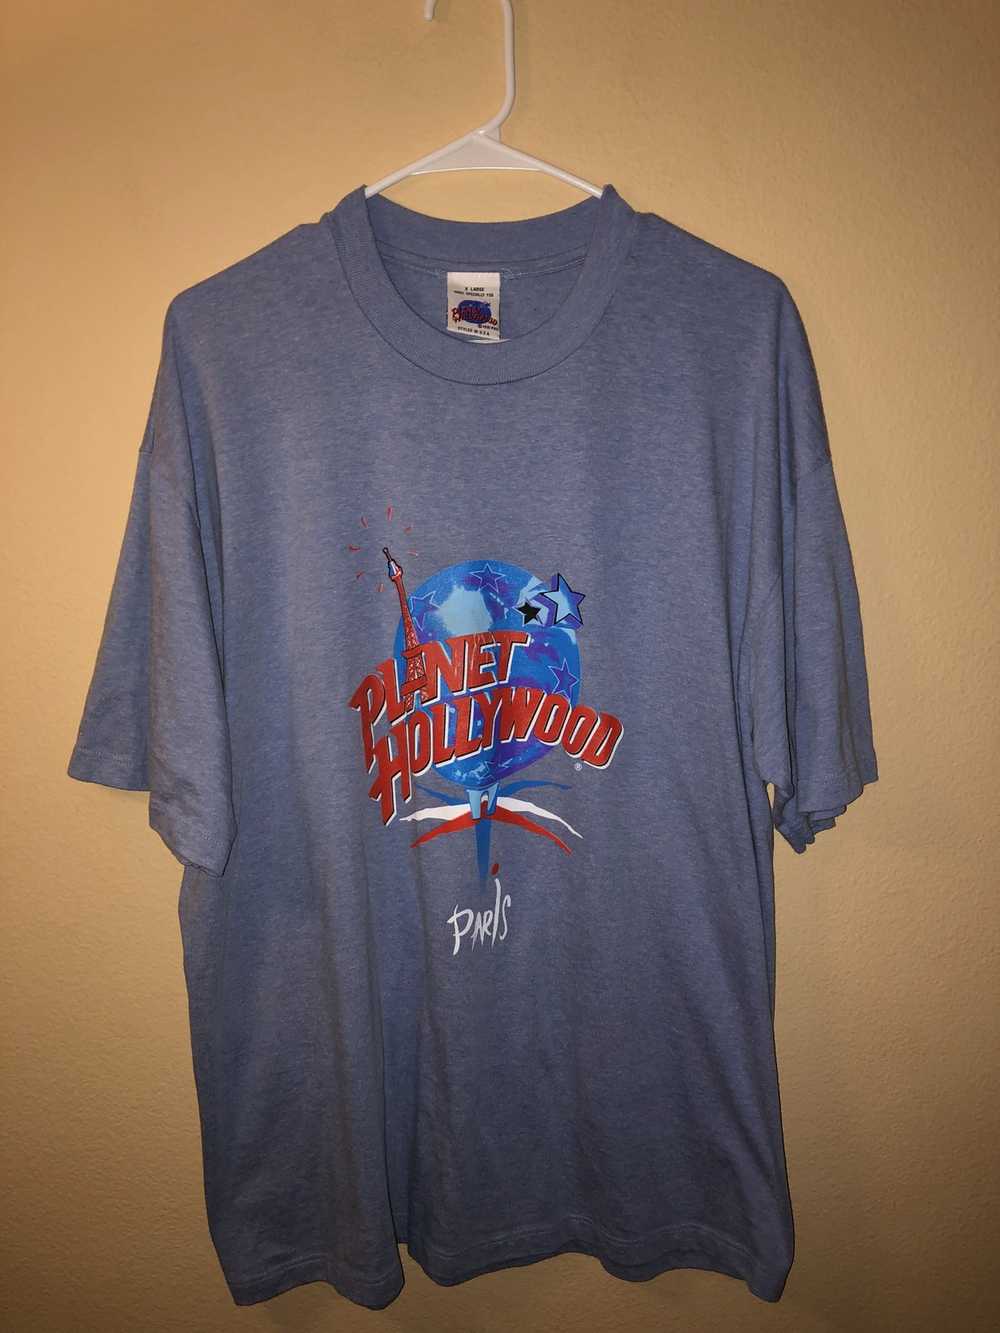 Planet Hollywood Vintage Planet Hollywood T-Shirt - image 1